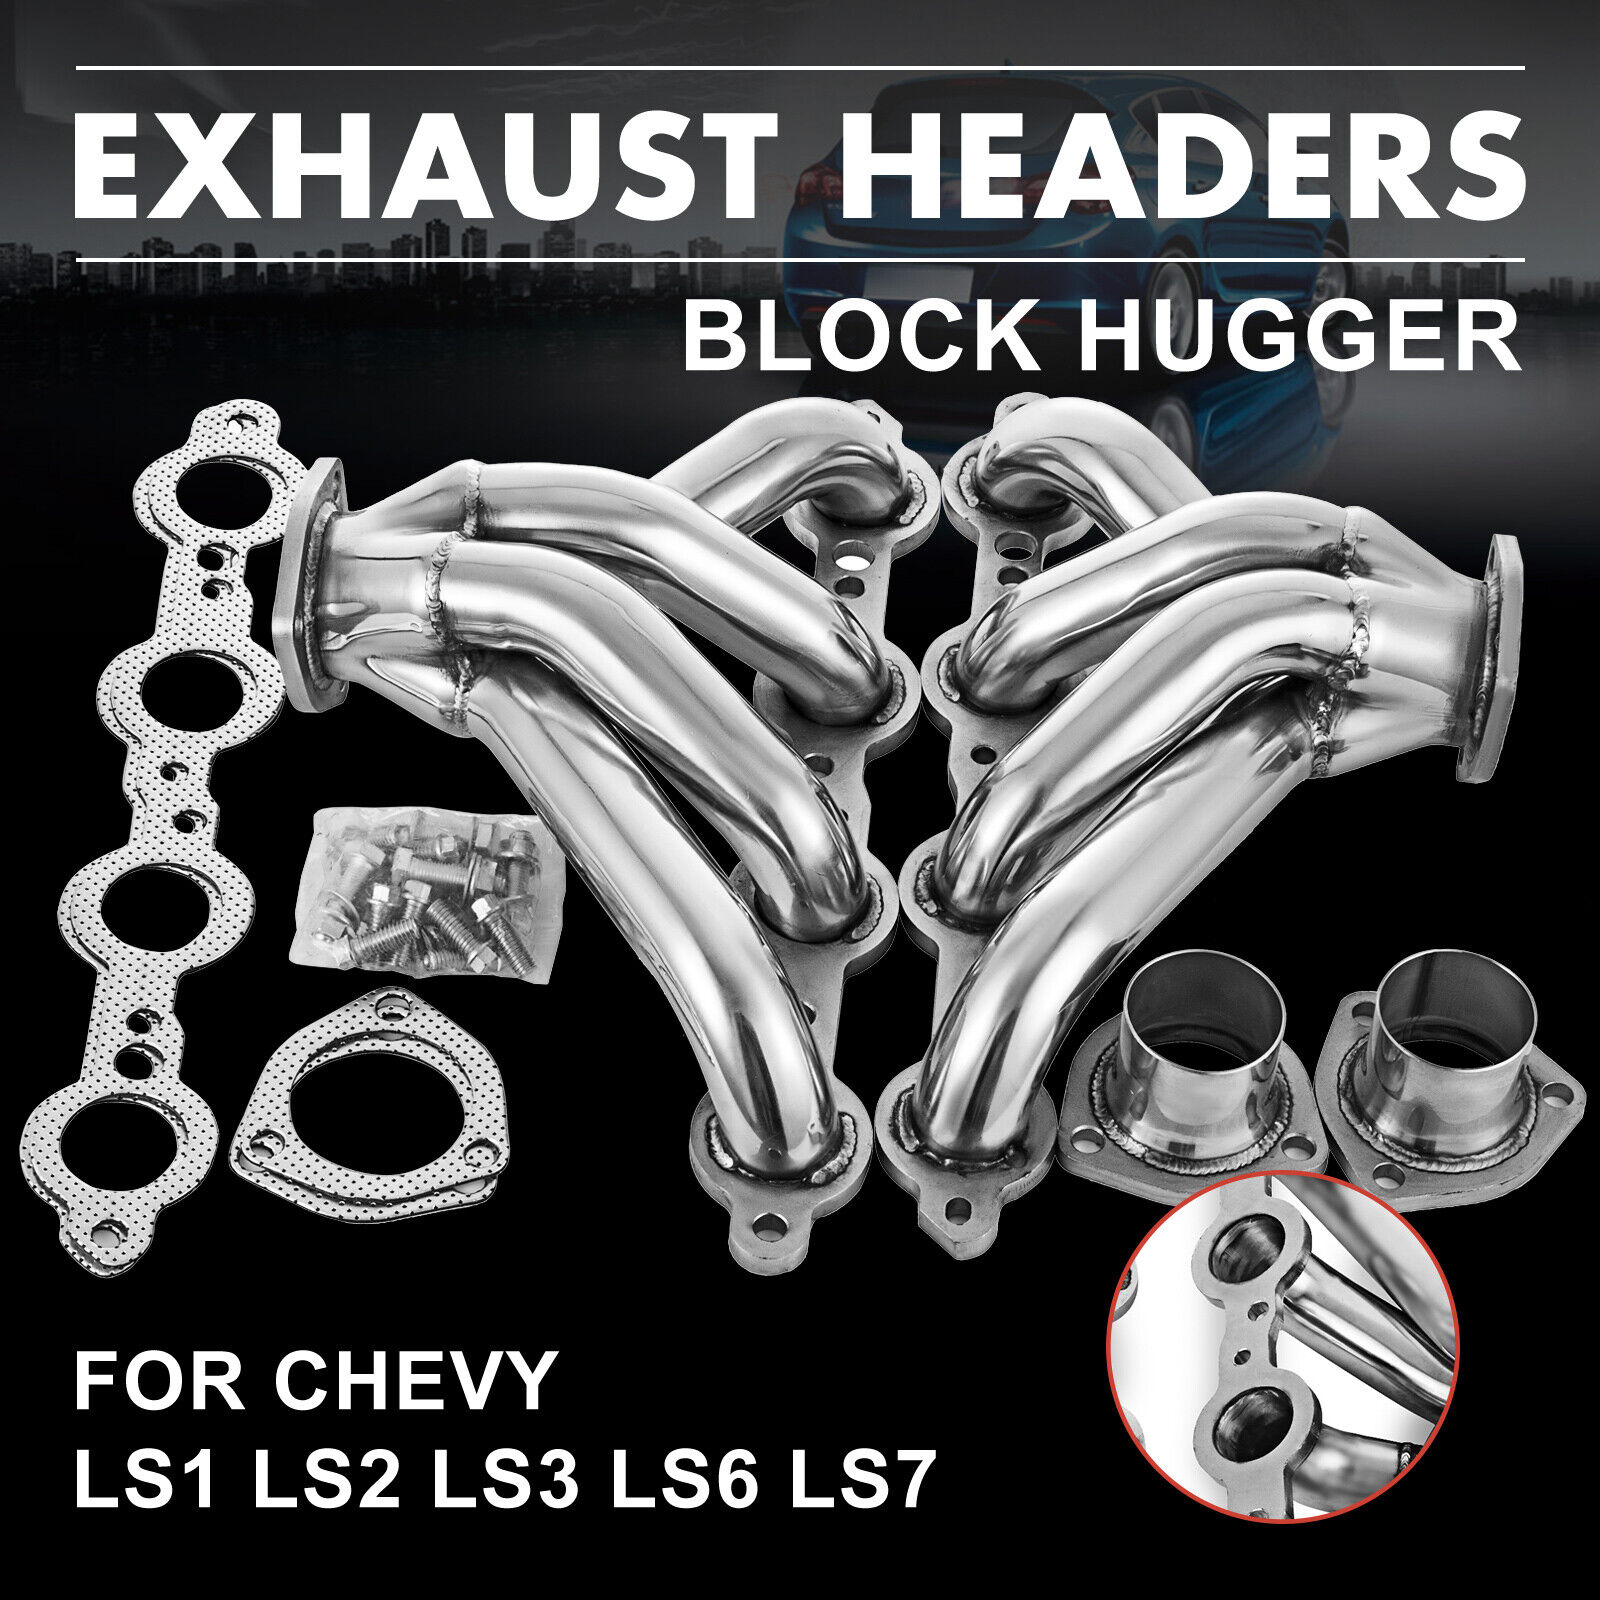 Racing Block Hugger Stainless Steel Exhaust Headers For Chevy LS1 LS6 Shorty